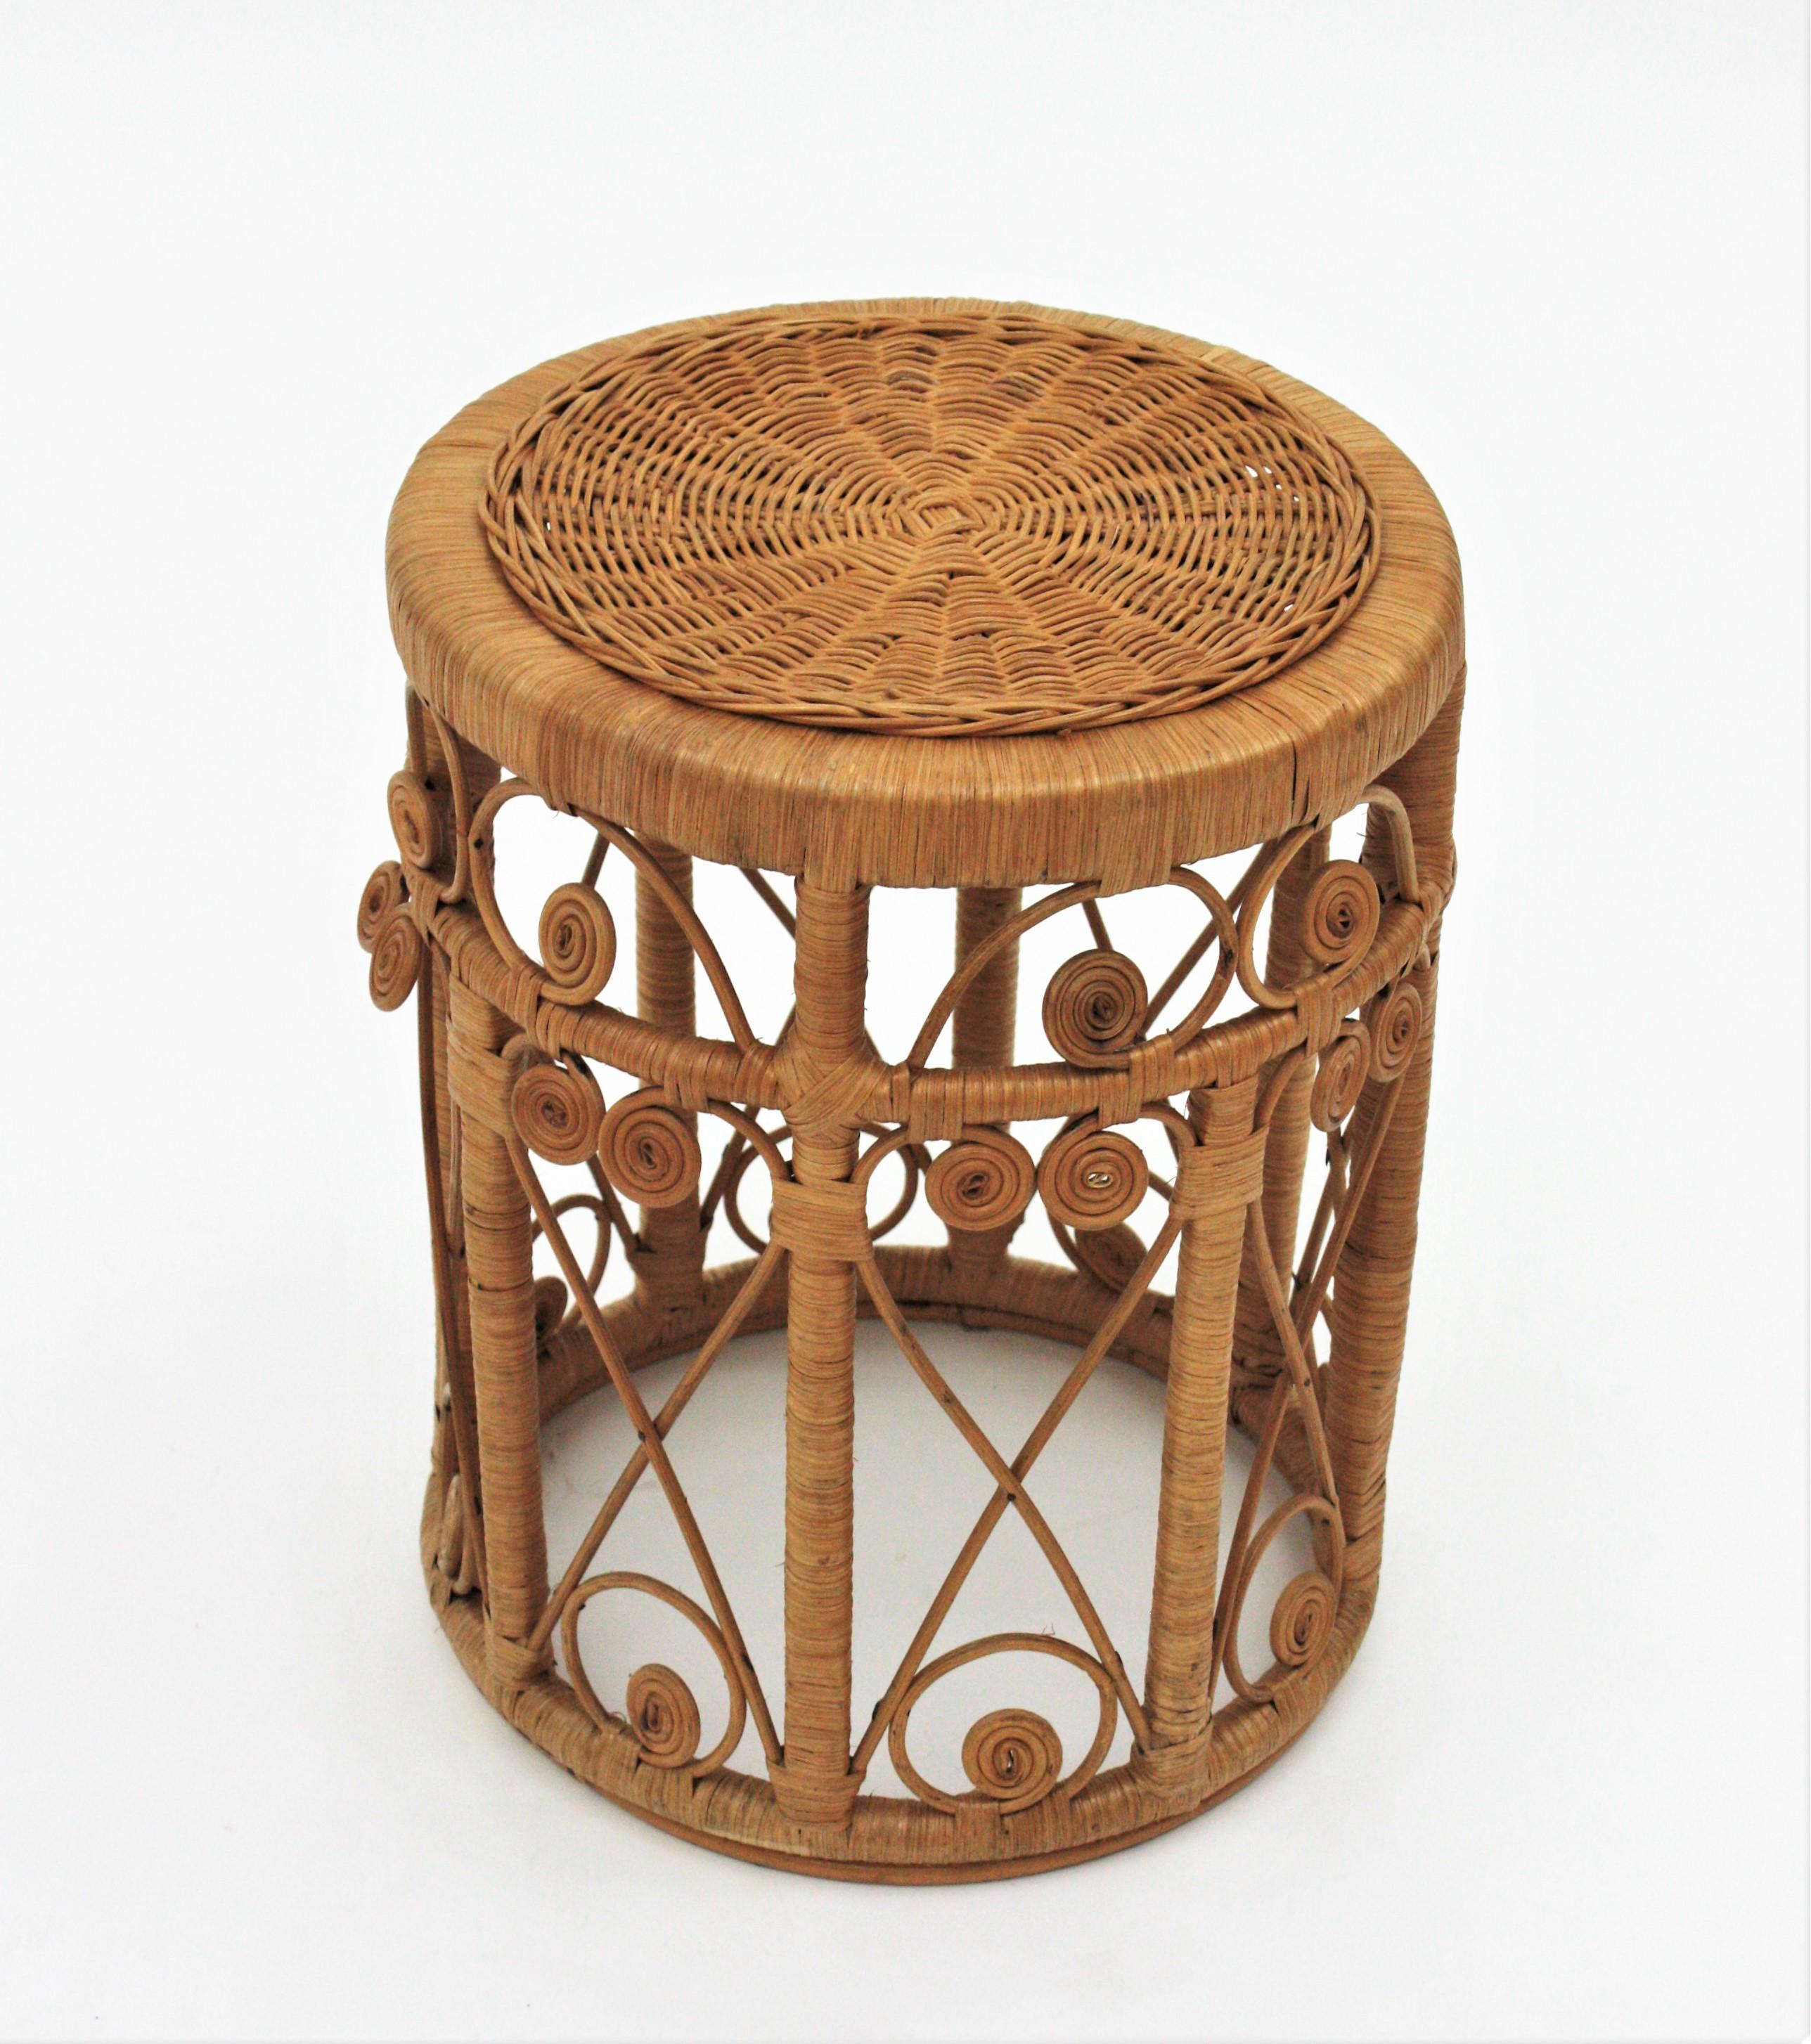 Bohemian Rattan Round Stool or End Table with Filigree Details, 1960s